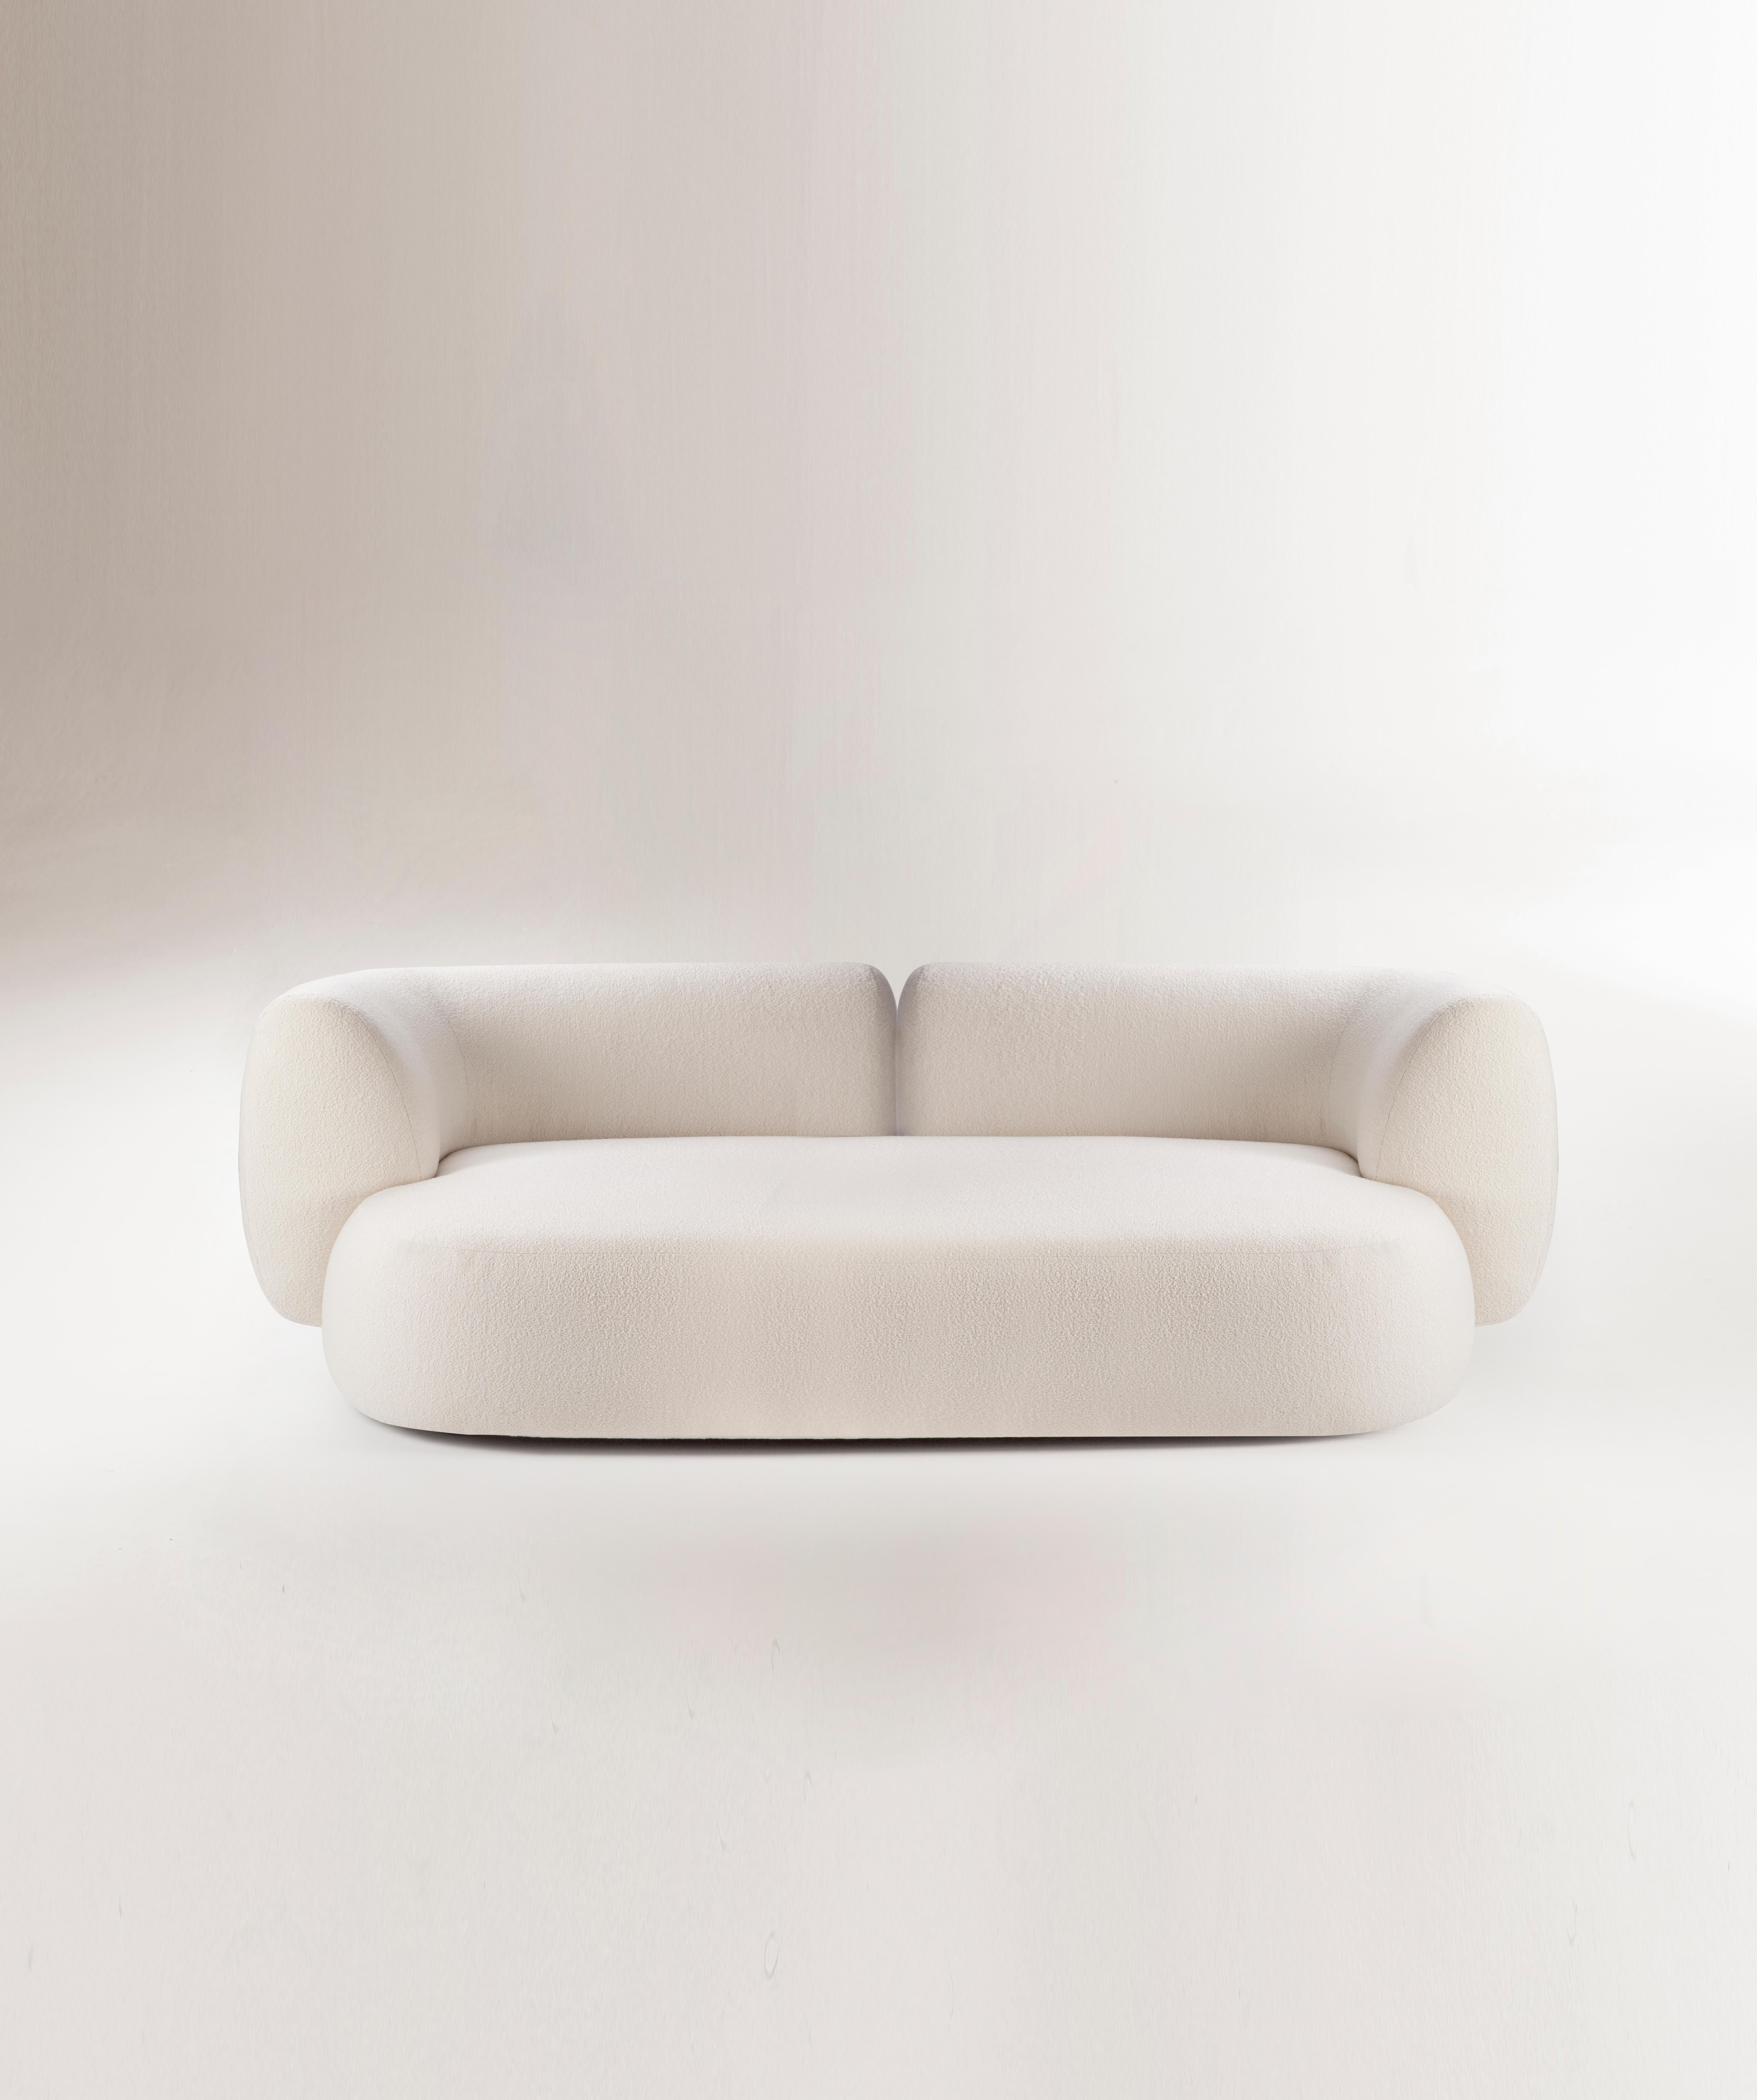 Portuguese Hug Sofa by Collector For Sale